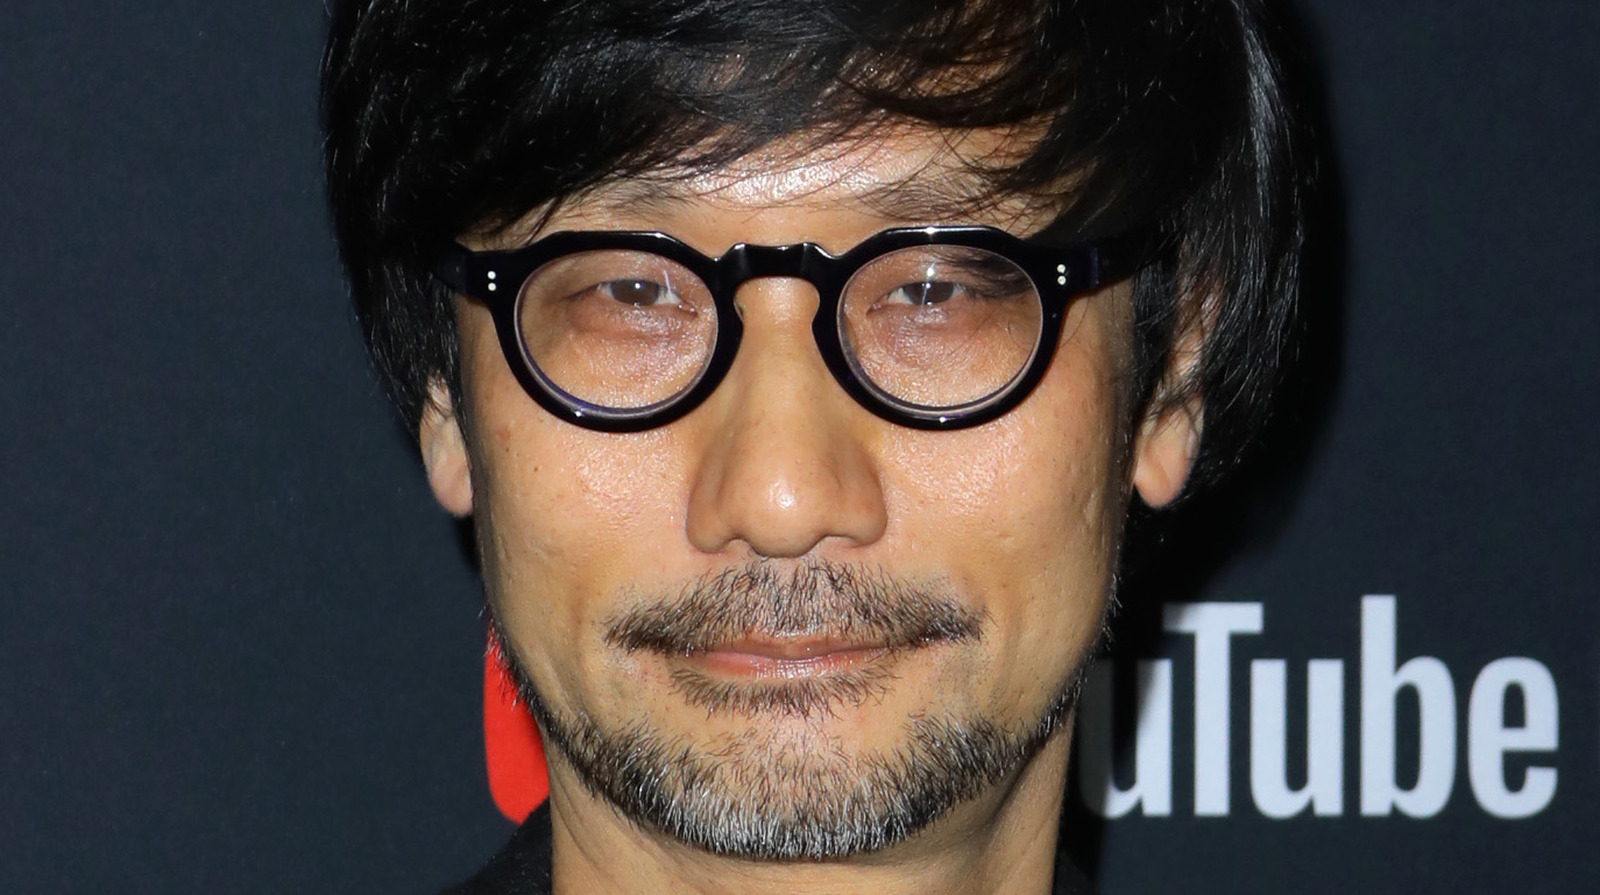 So. This seems to be Hideo Kojima's twitter account - PlayStation 4